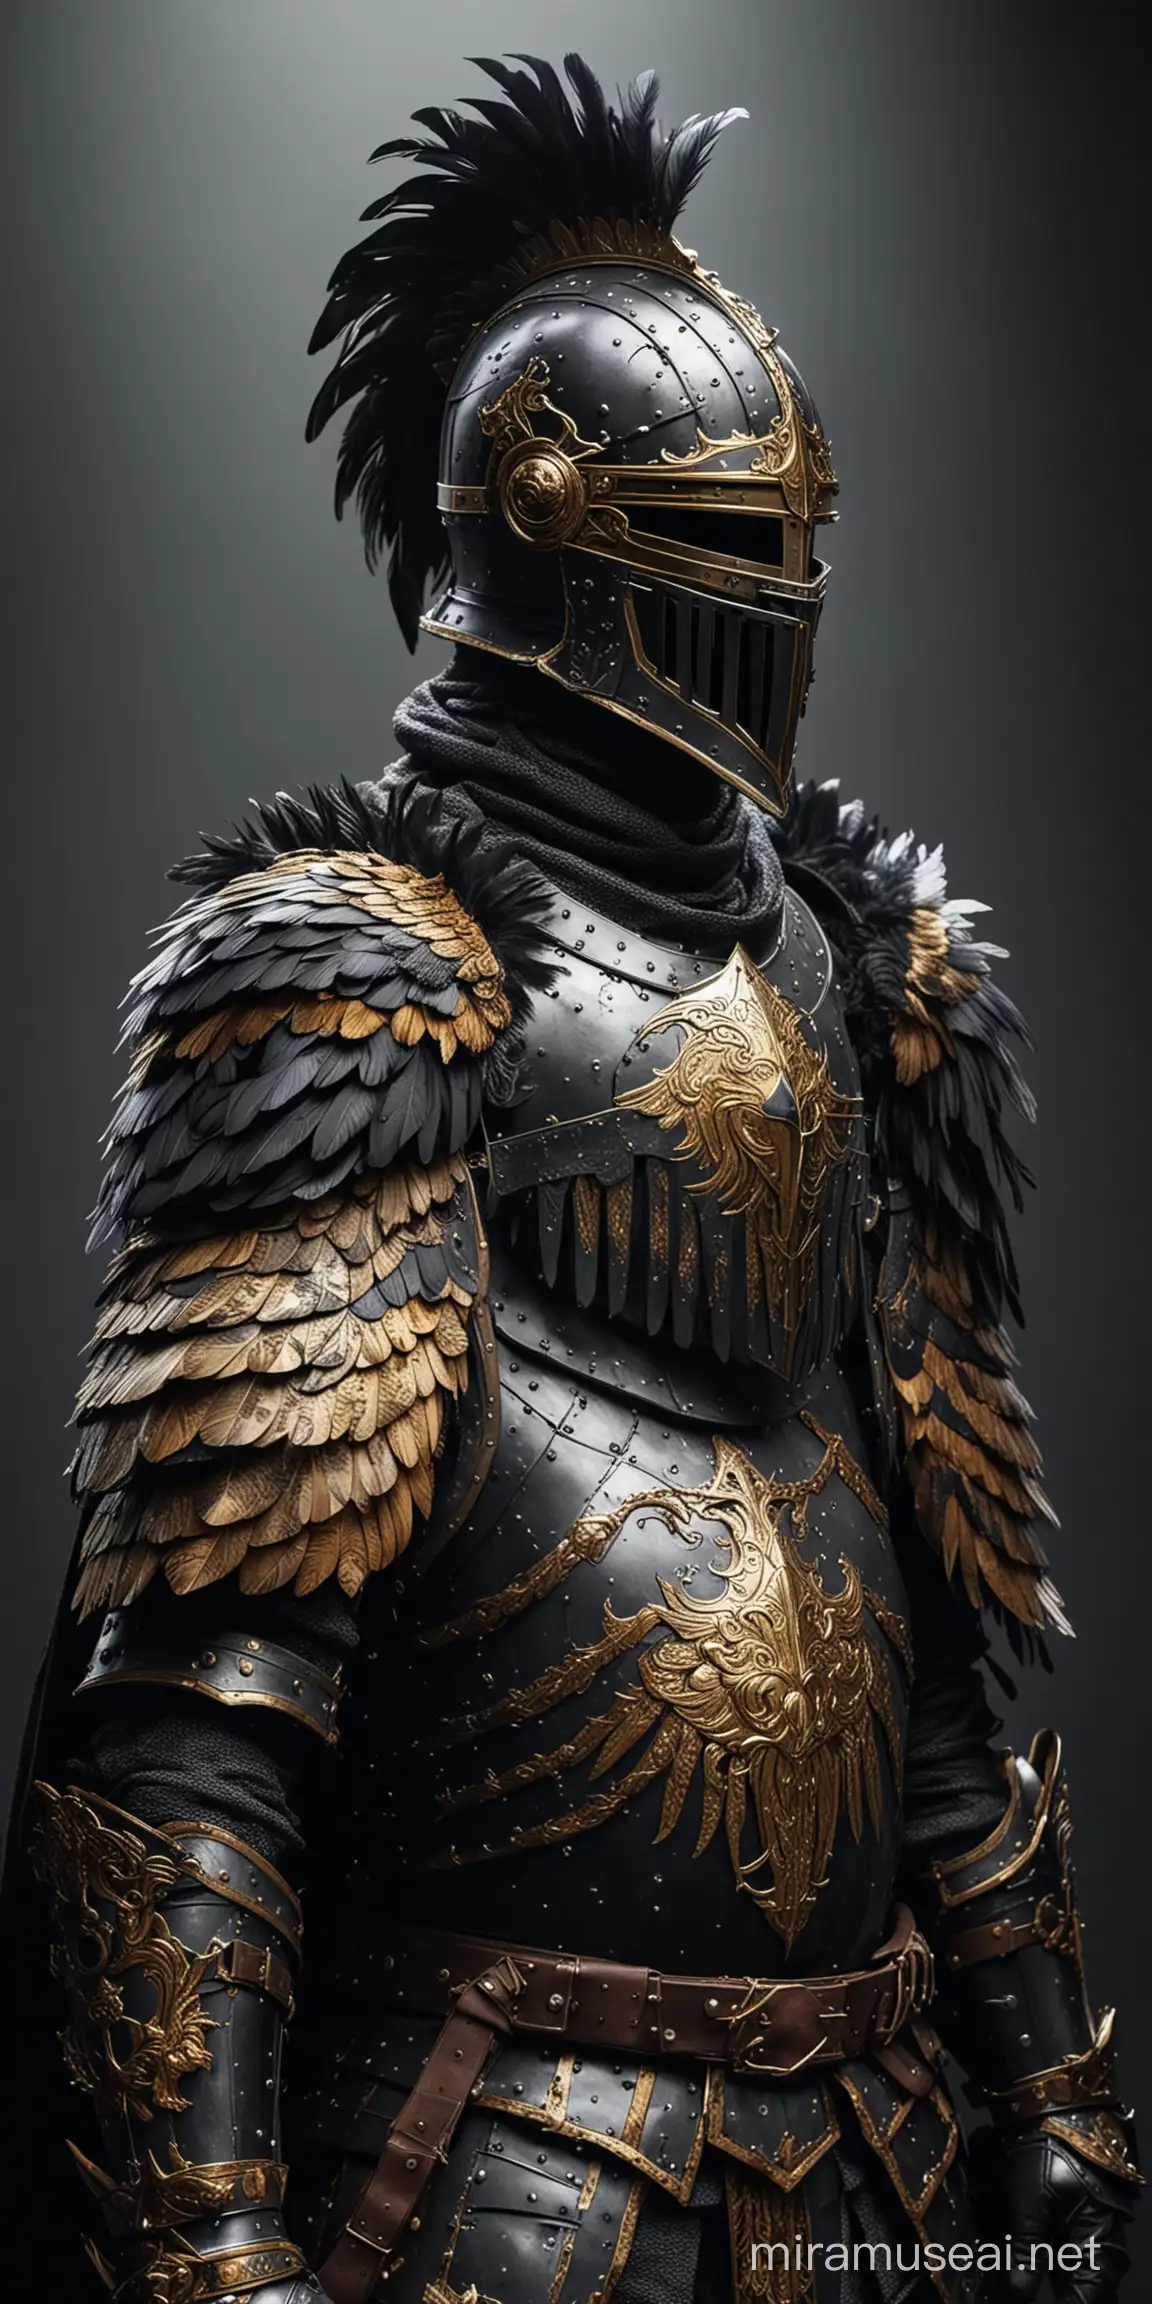 knight. the armor covers the entire body and has feathers is certain places for cold protection. Armor for a loyal knight who protects the king. The armor has gold trims and black paint. Bunch of feathers behind the helmet like a cape. the knight is facing forward toward the camera